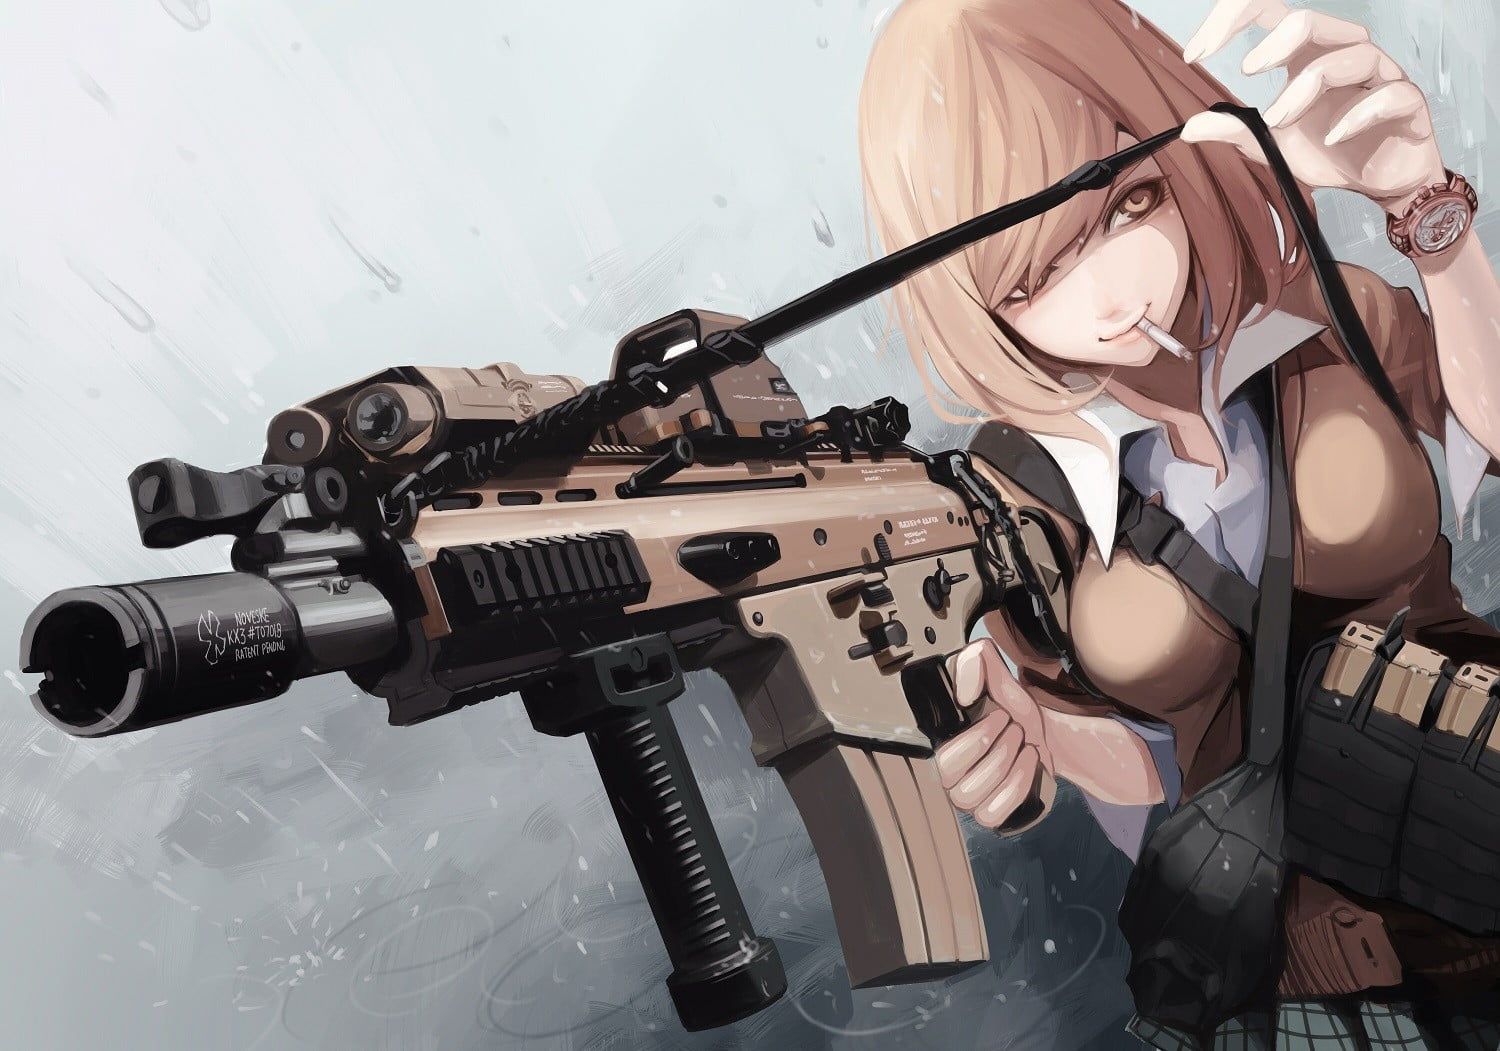 Black haired female anime character with rifle digital wallpaper